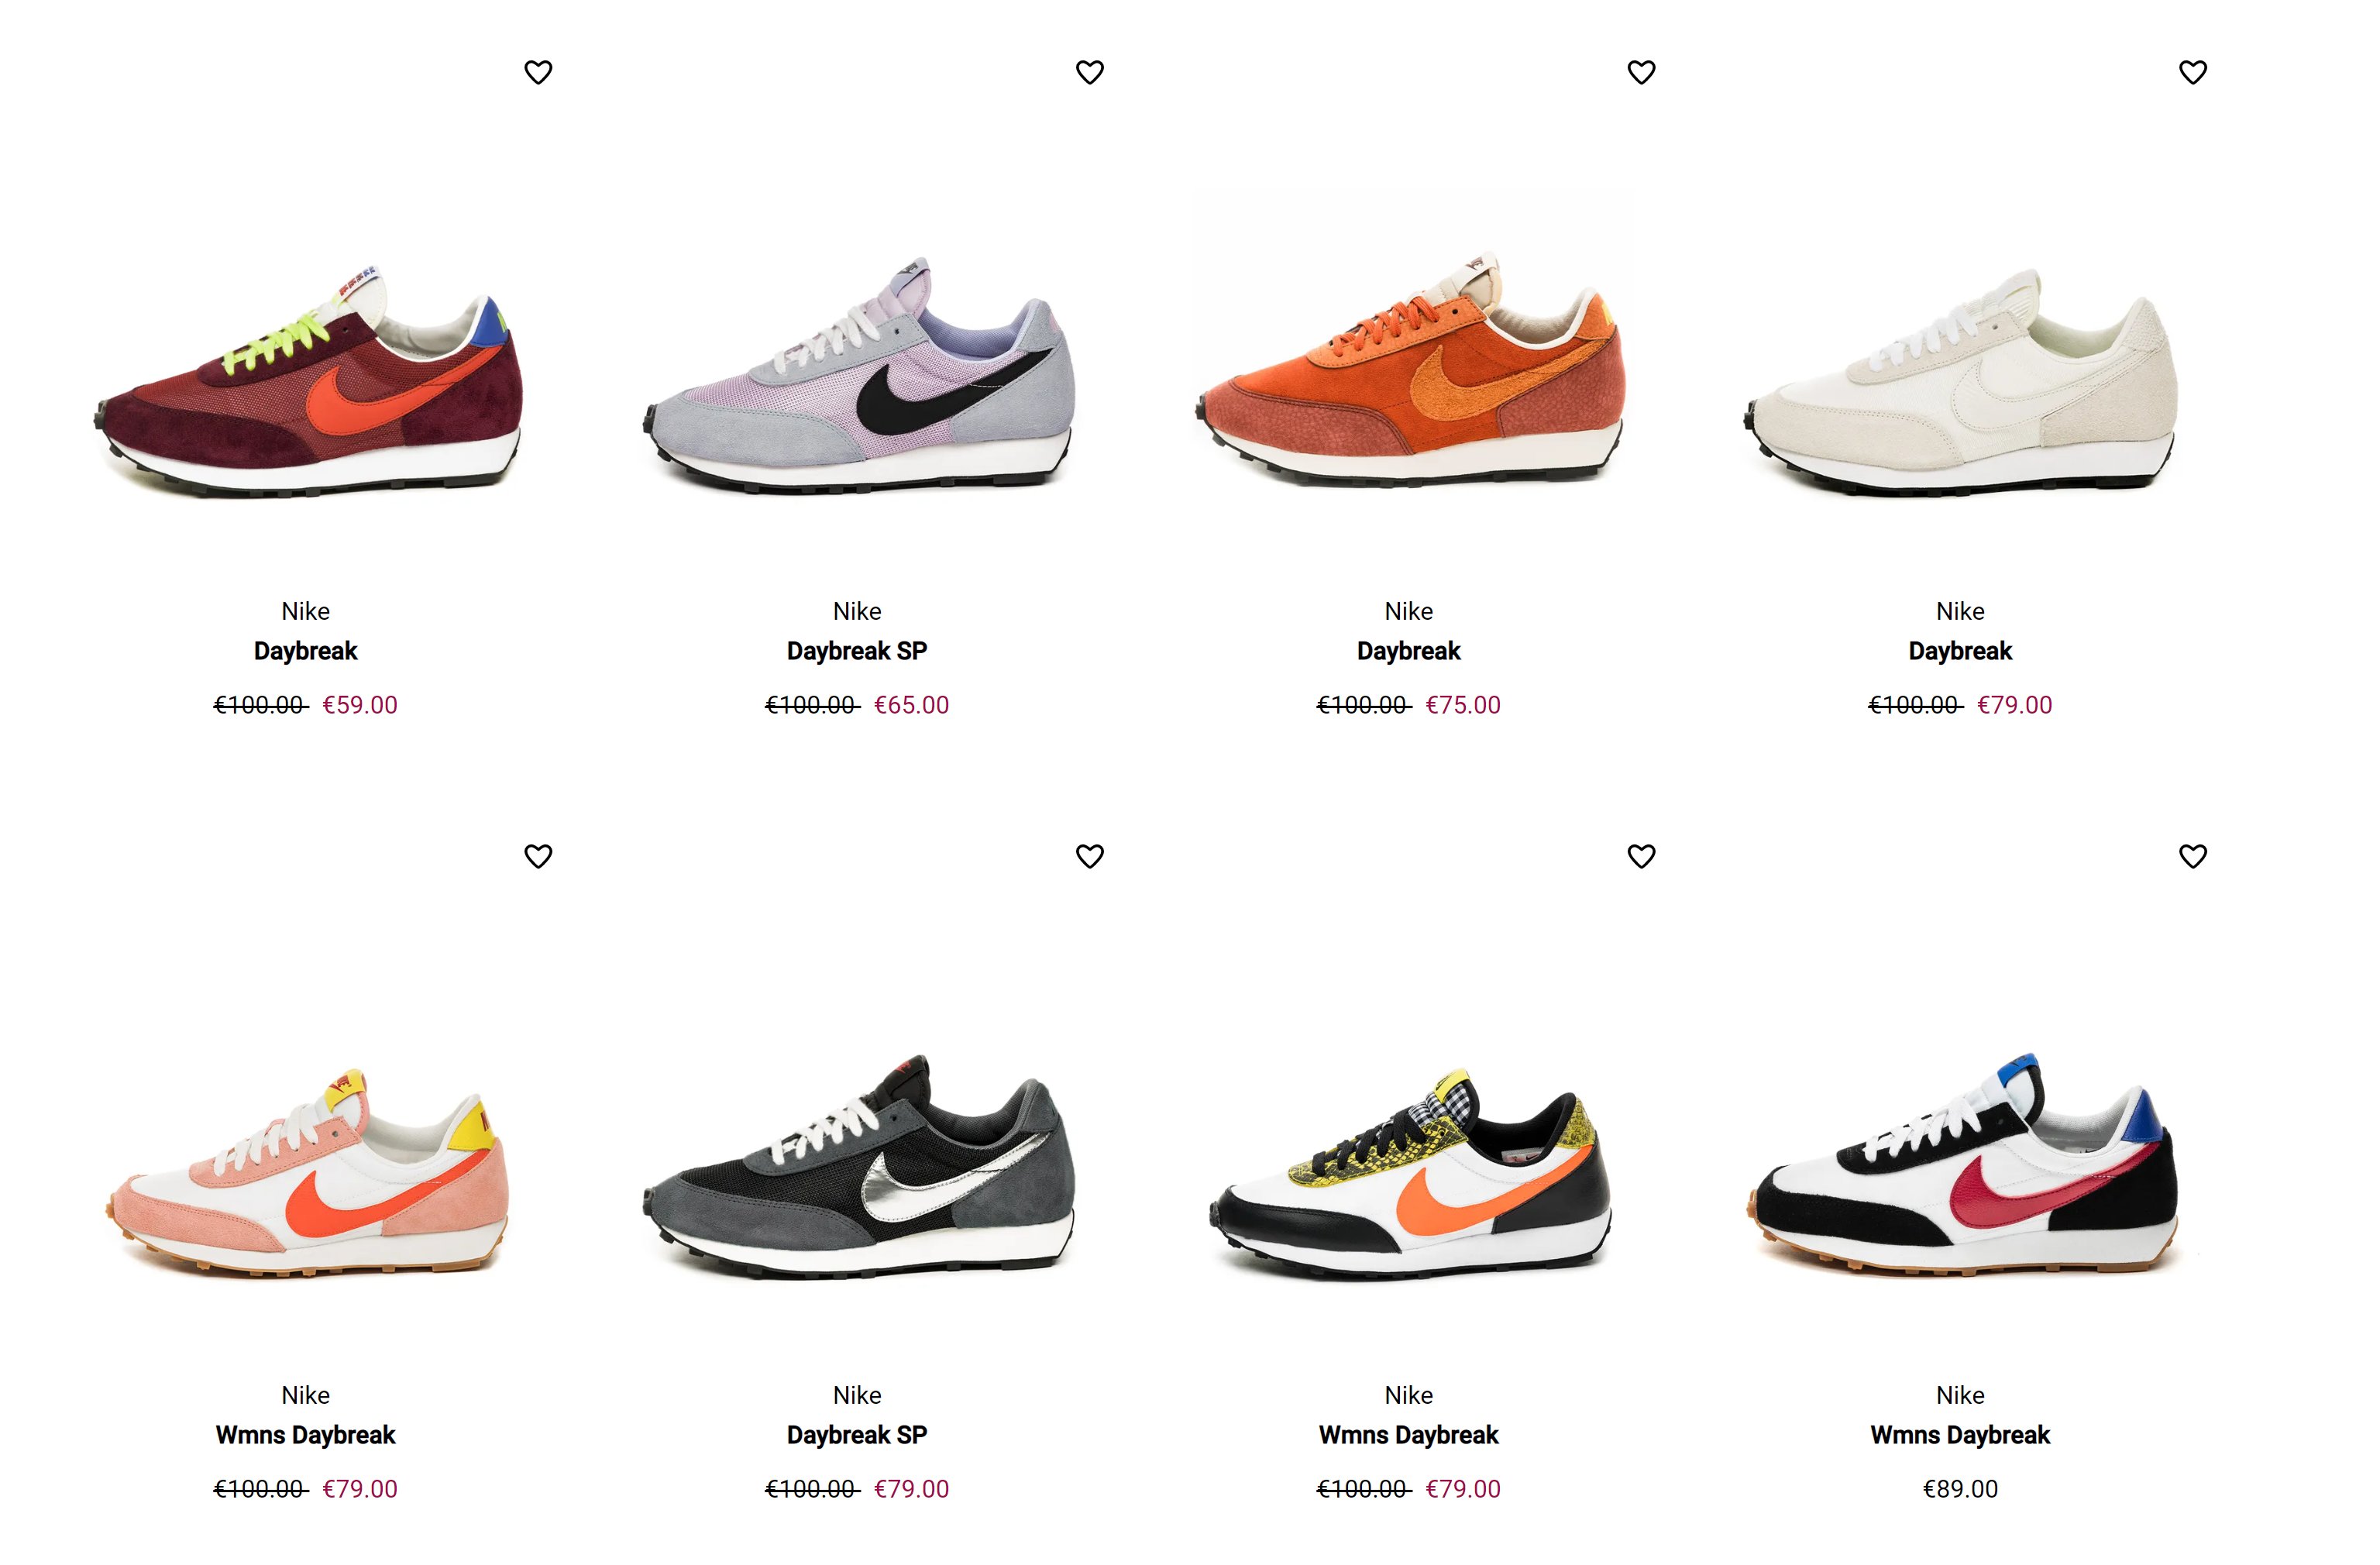 MoreSneakers.com on Twitter: "AD: Selected Nike Daybreak are available on  sale via asphaltgold => https://t.co/AxwAA7sDnl https://t.co/WvPLWuMVcK" /  Twitter